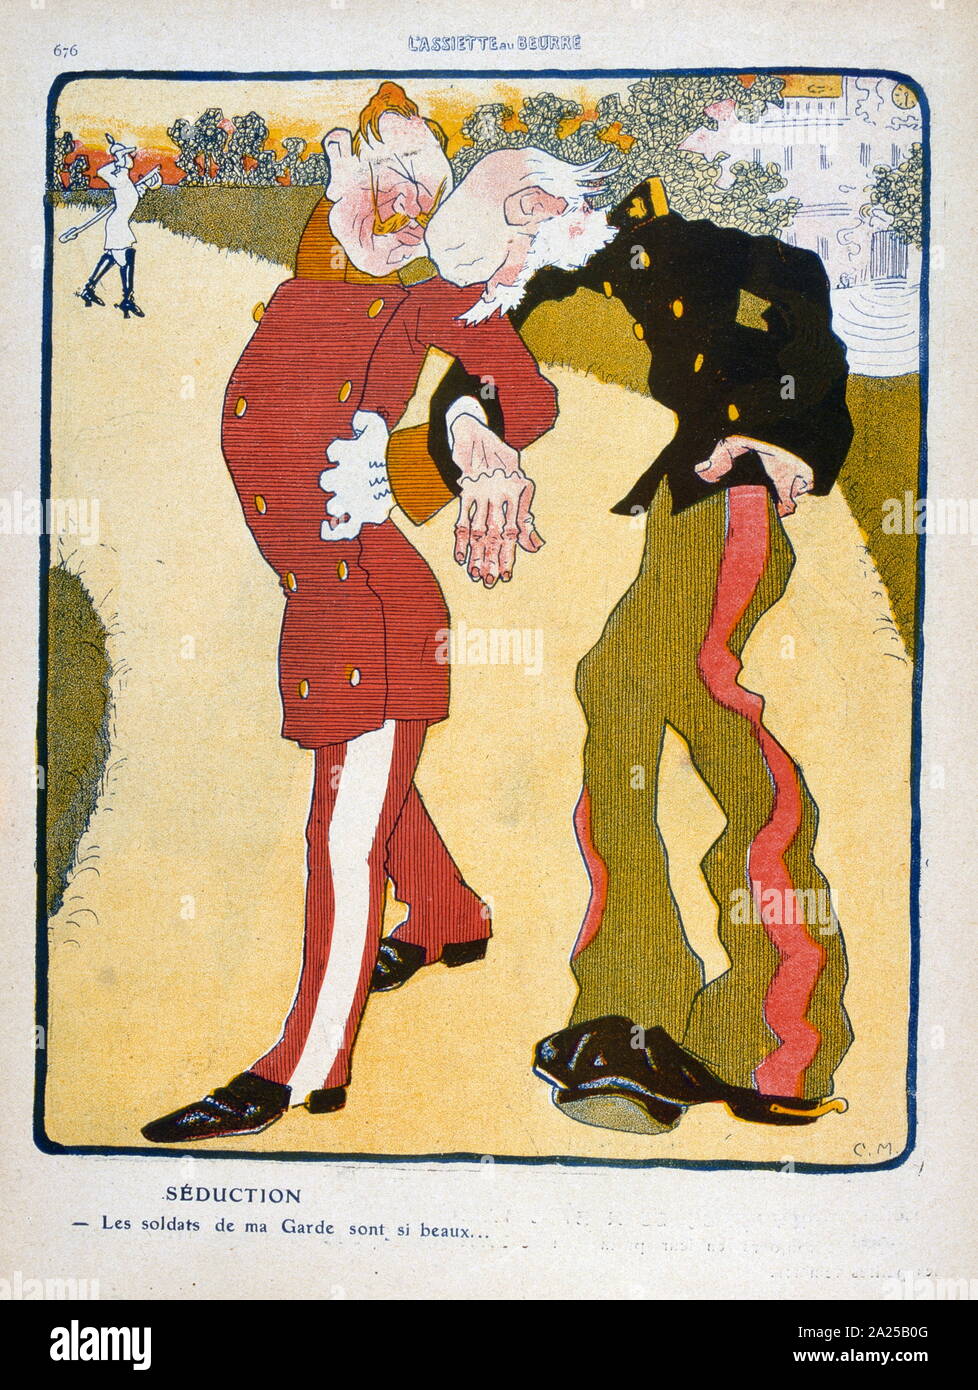 Illustration in a French magazine depicting a satirical view of the German Kaiser Wilhelm II with the Austrian Emperor, Franz Joseph I in 1909 Stock Photo